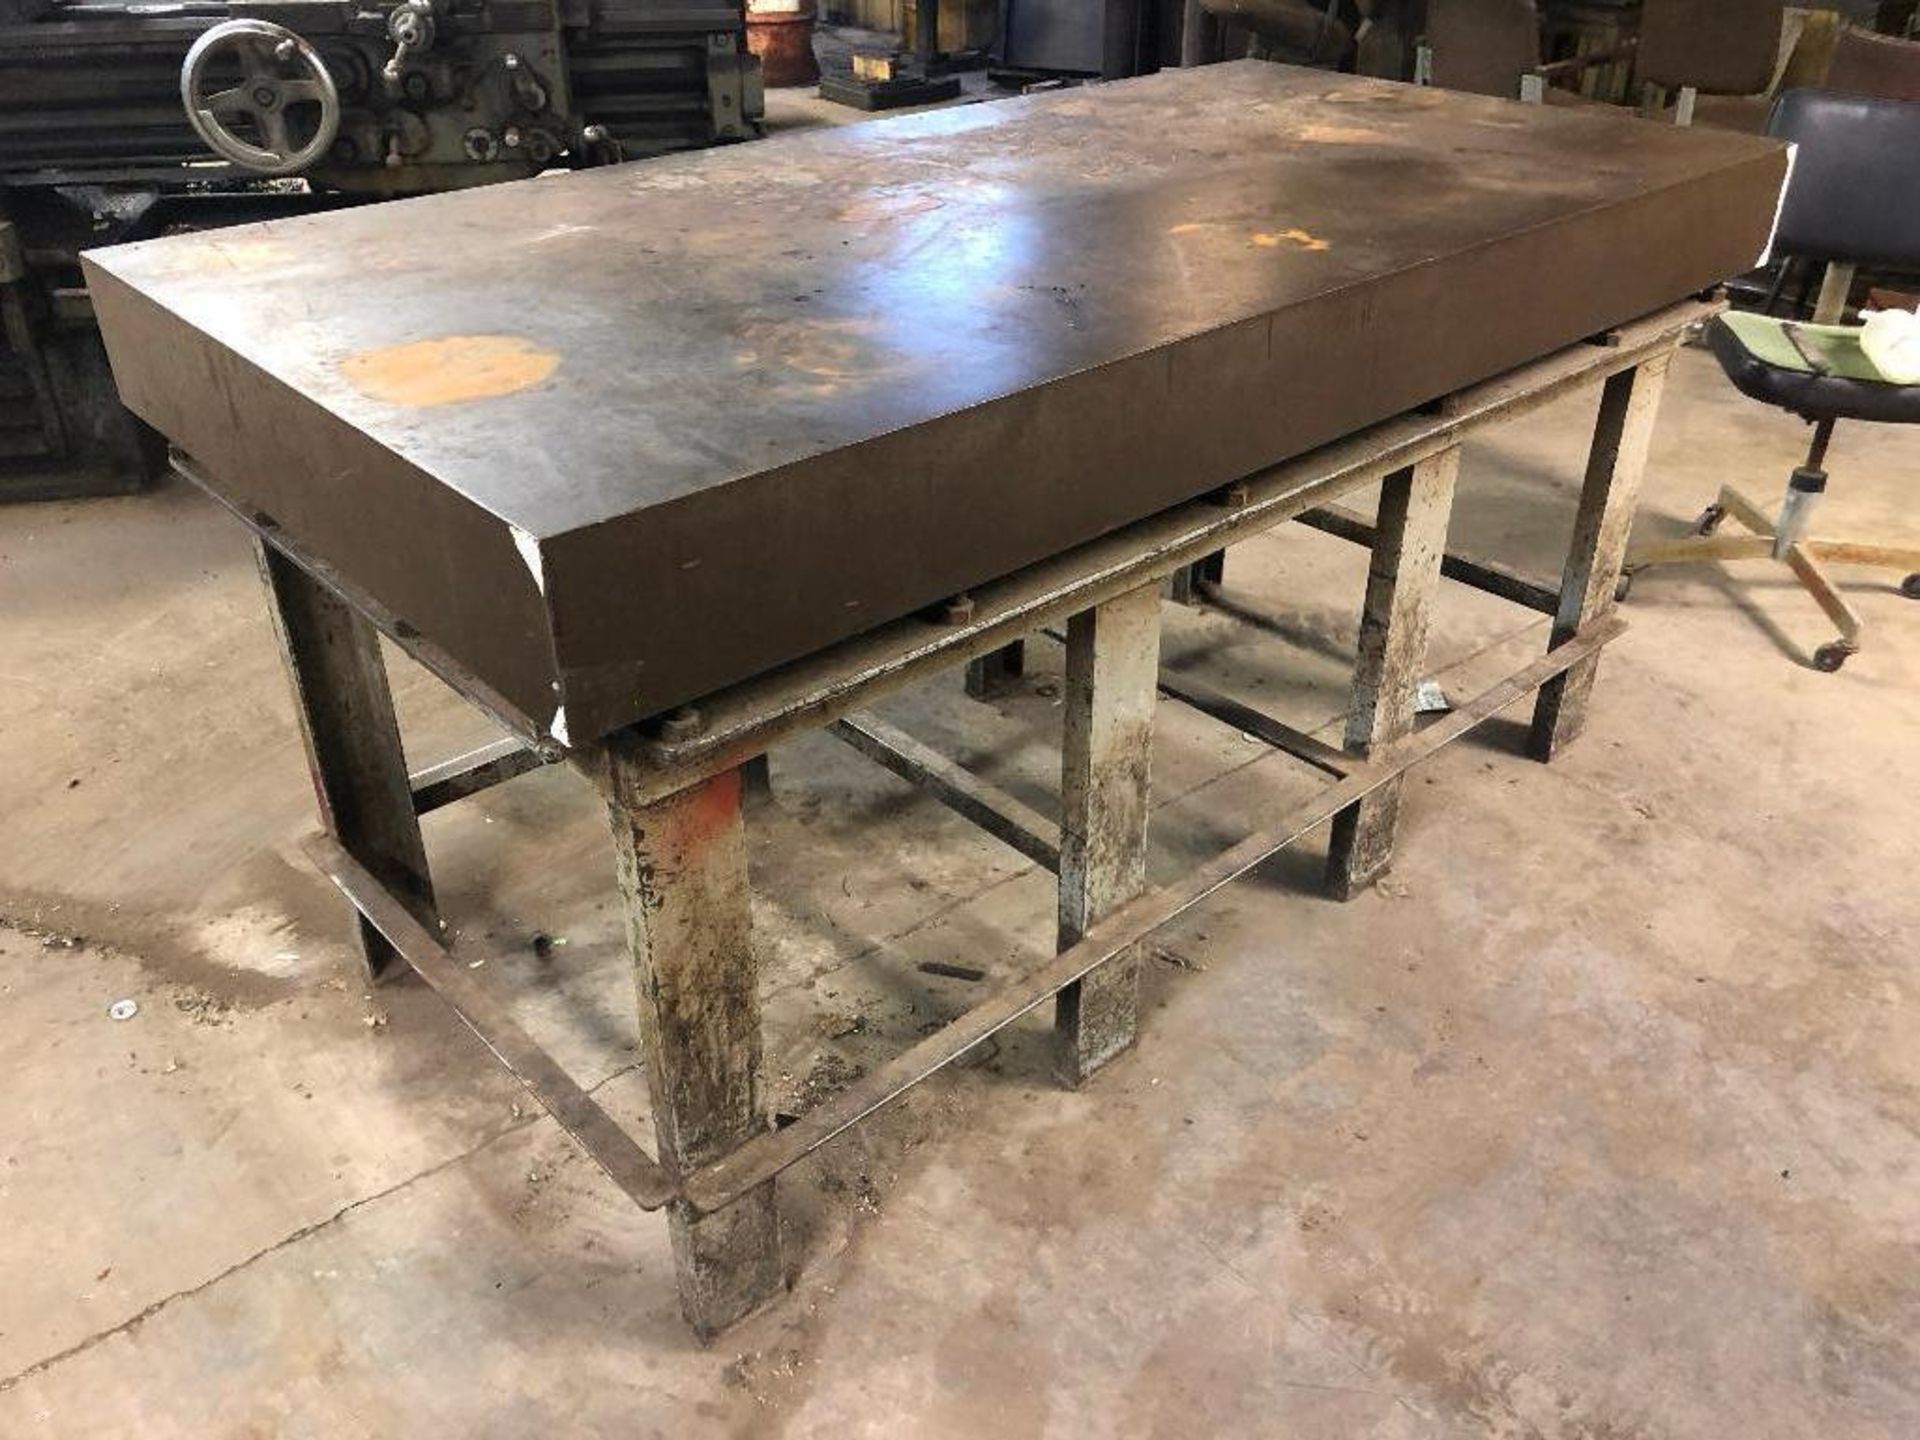 DESCRIPTION: 72" X 35" STEEL FABRICATION TABLE / WELDING TABLE. SIZE: 72" X 25" X 6" LOCATION: FRONT